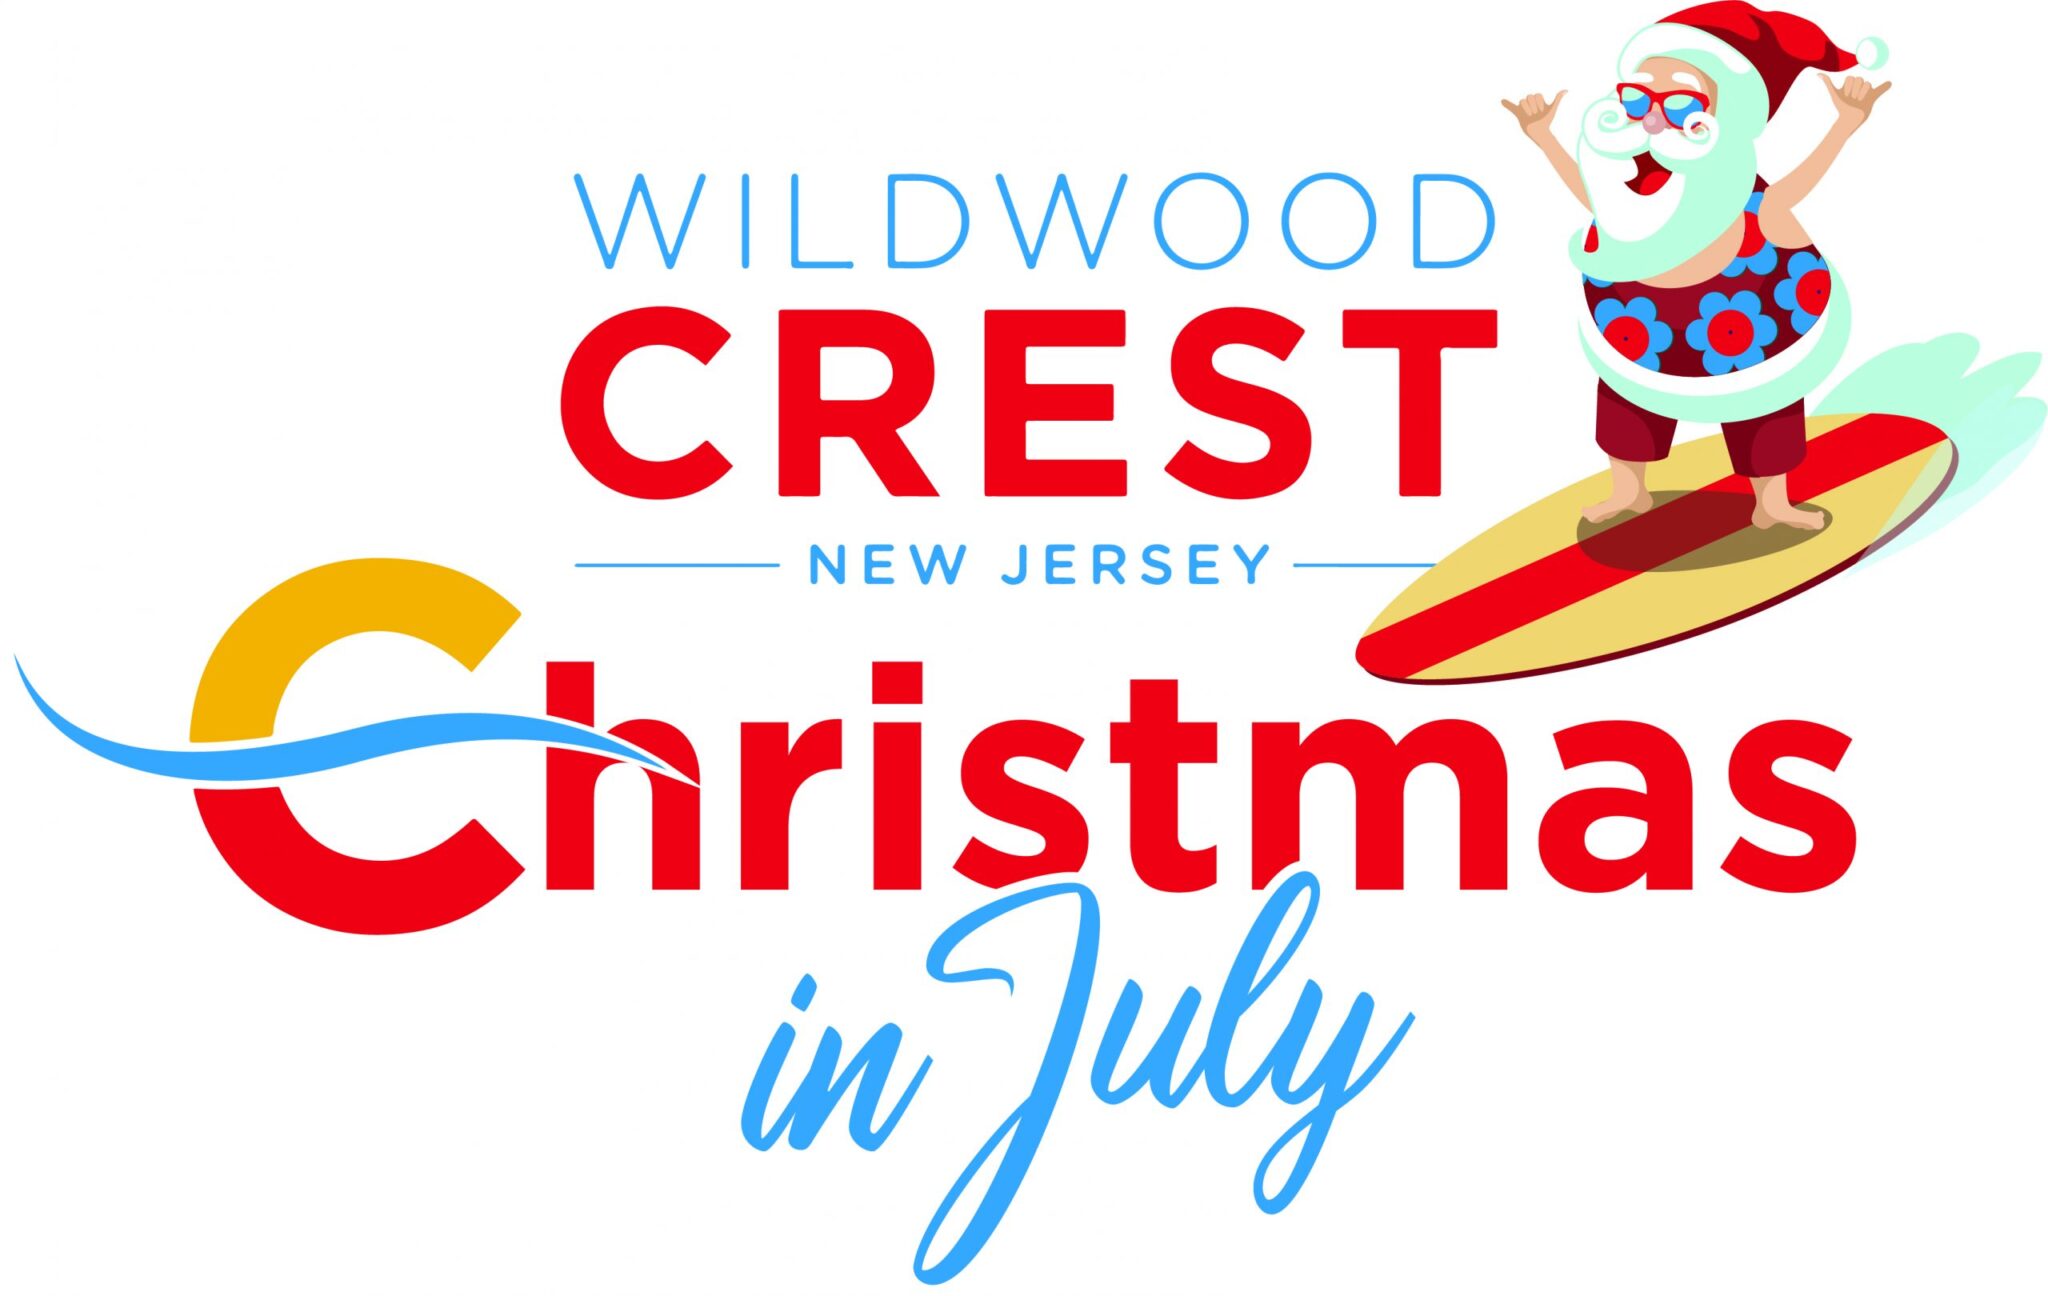 Wildwood Crest Christmas in July Festival & Boat Parade